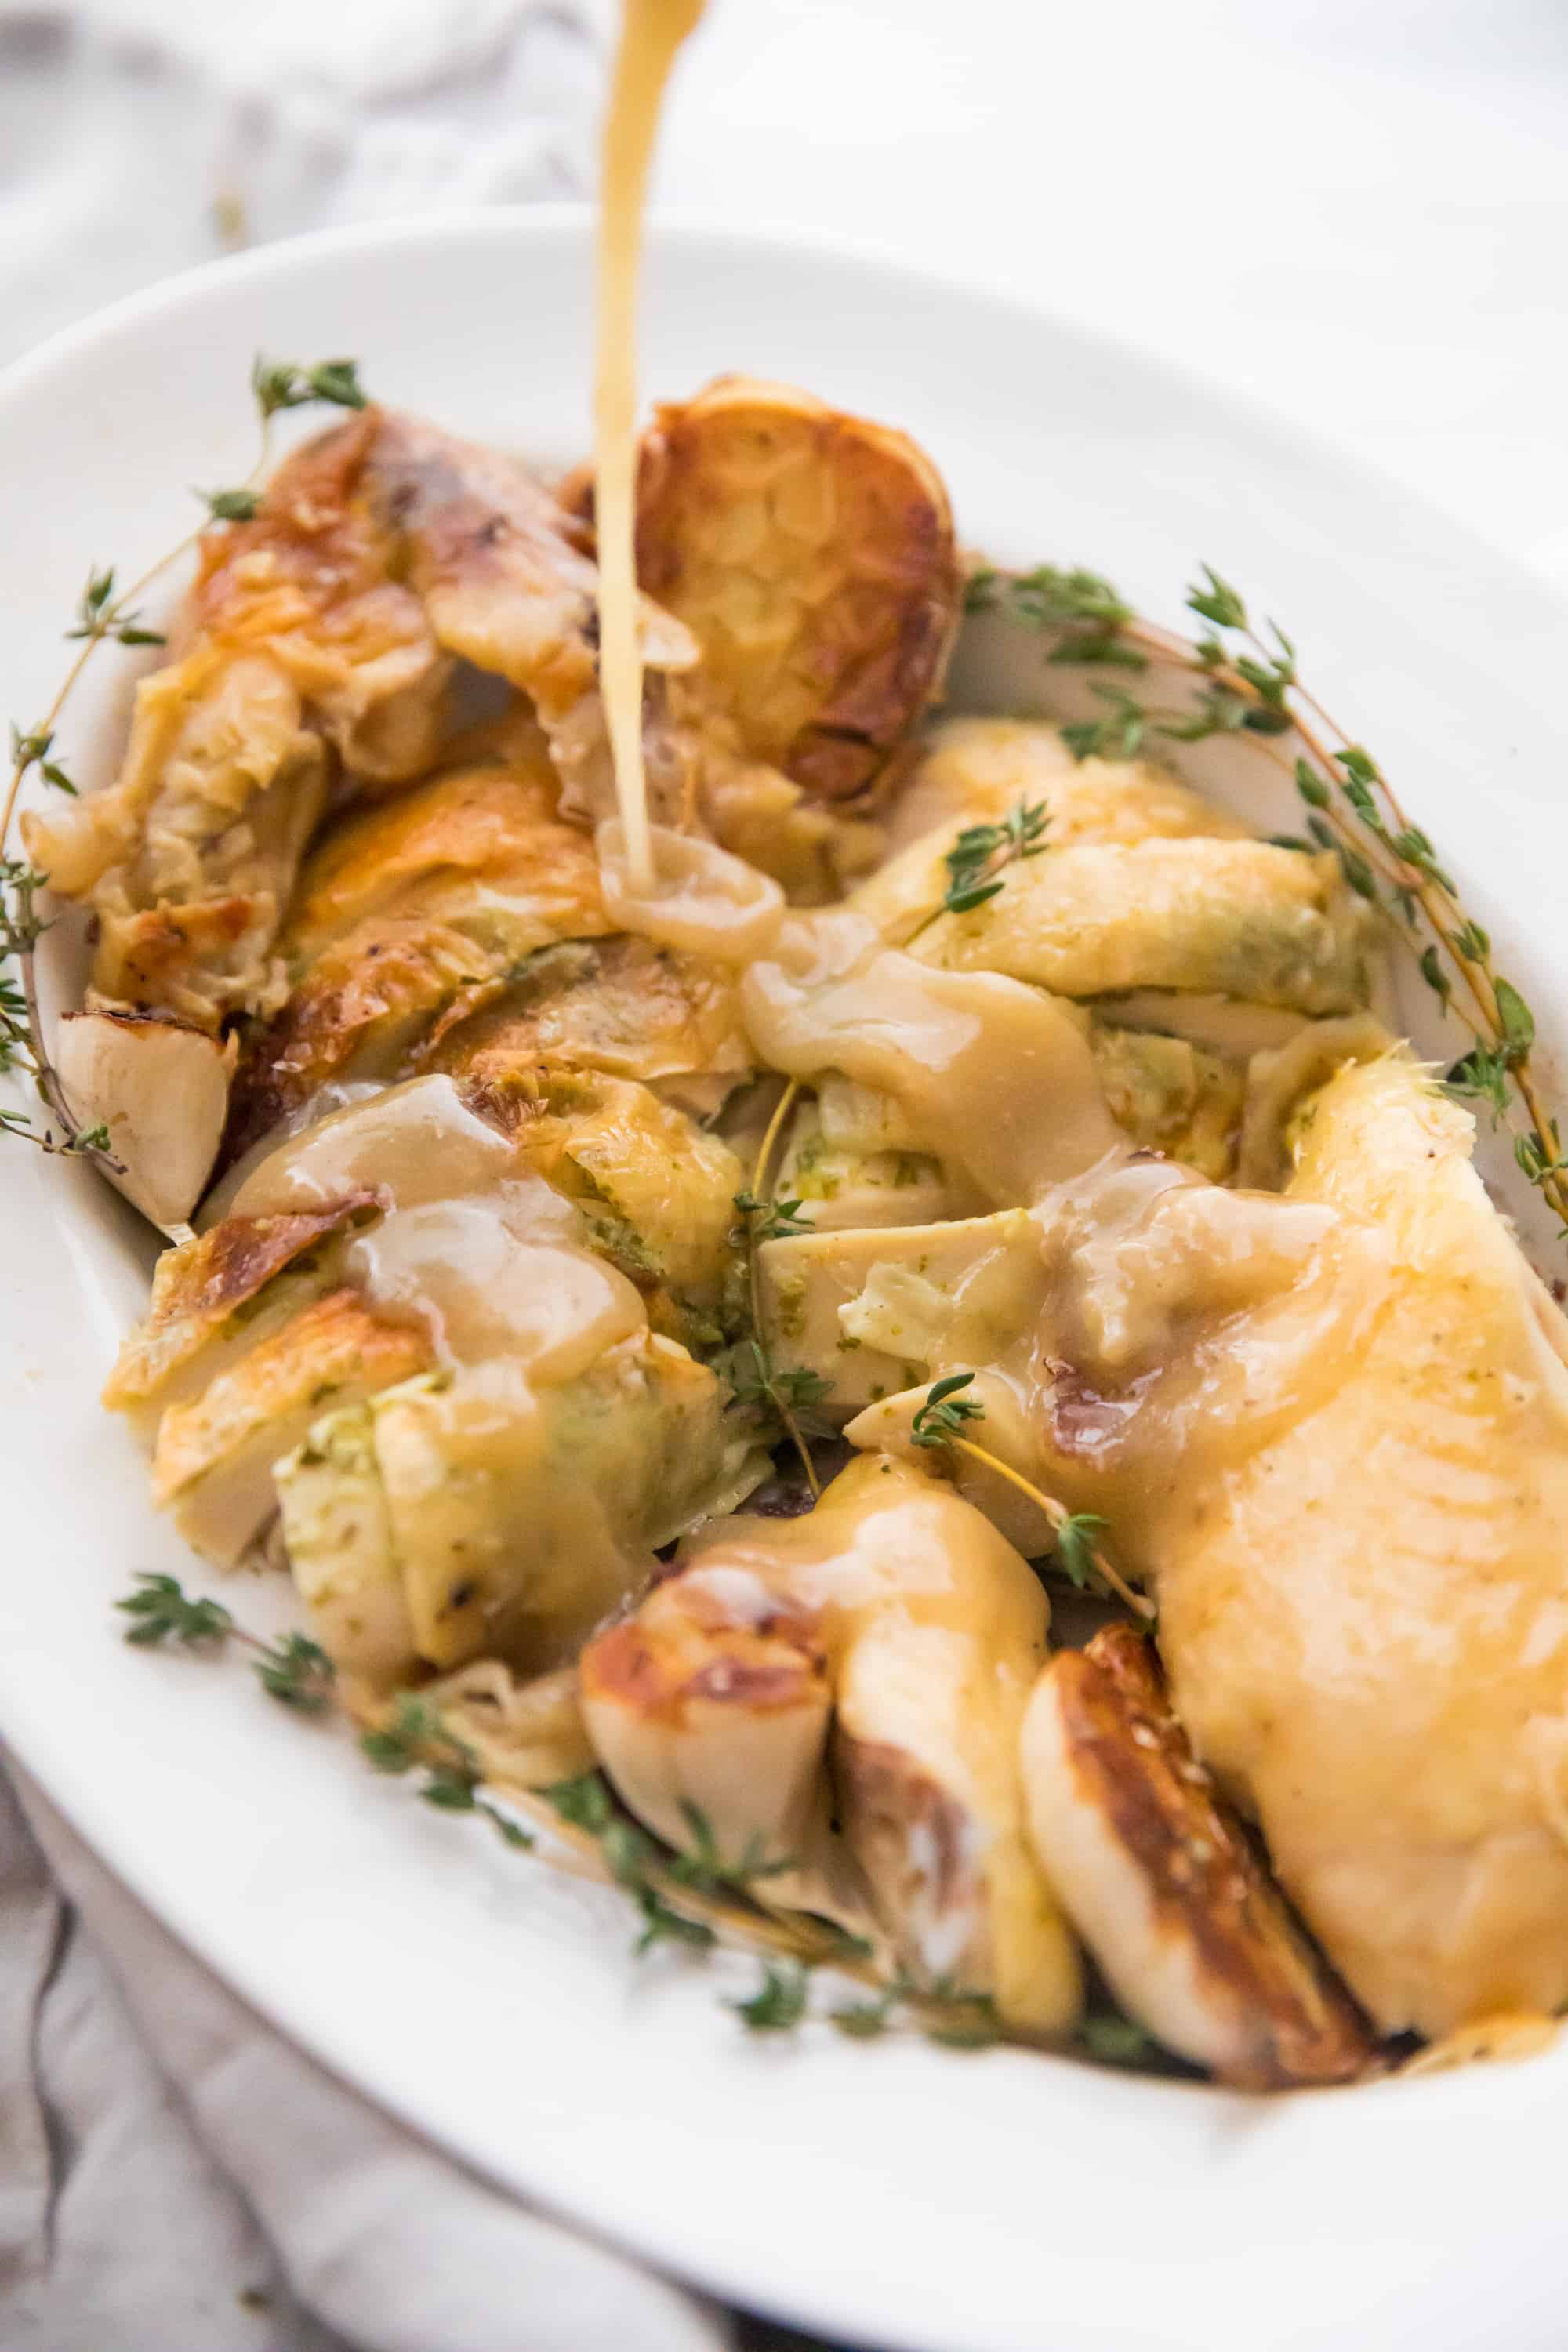 Slow Cooker Garlic Chicken with Gravy Pour